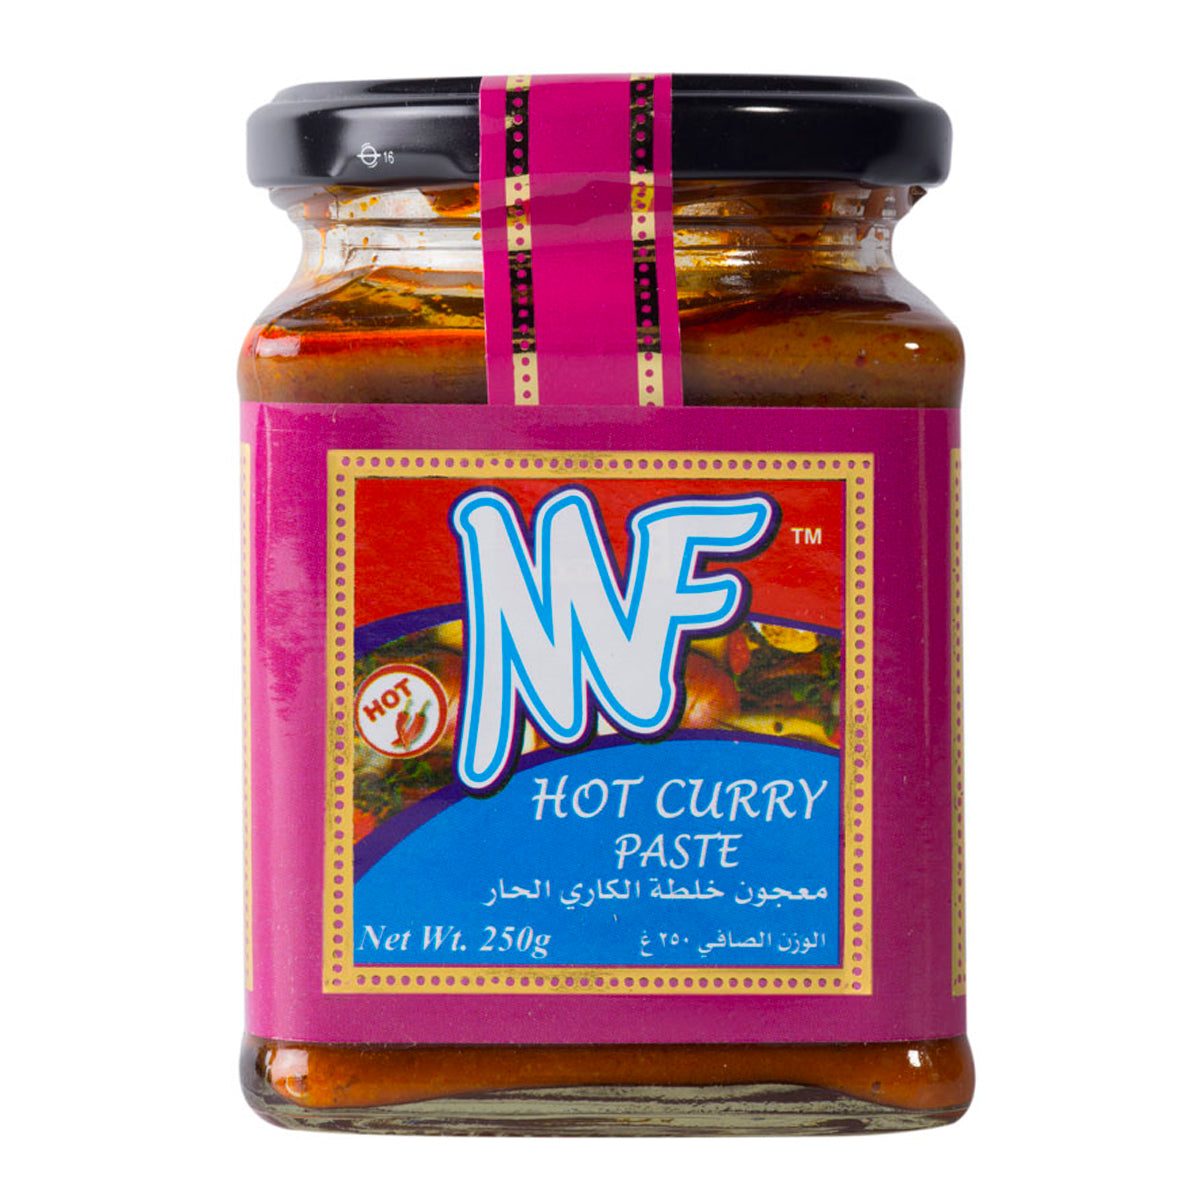 MF Hot Curry Paste 250g